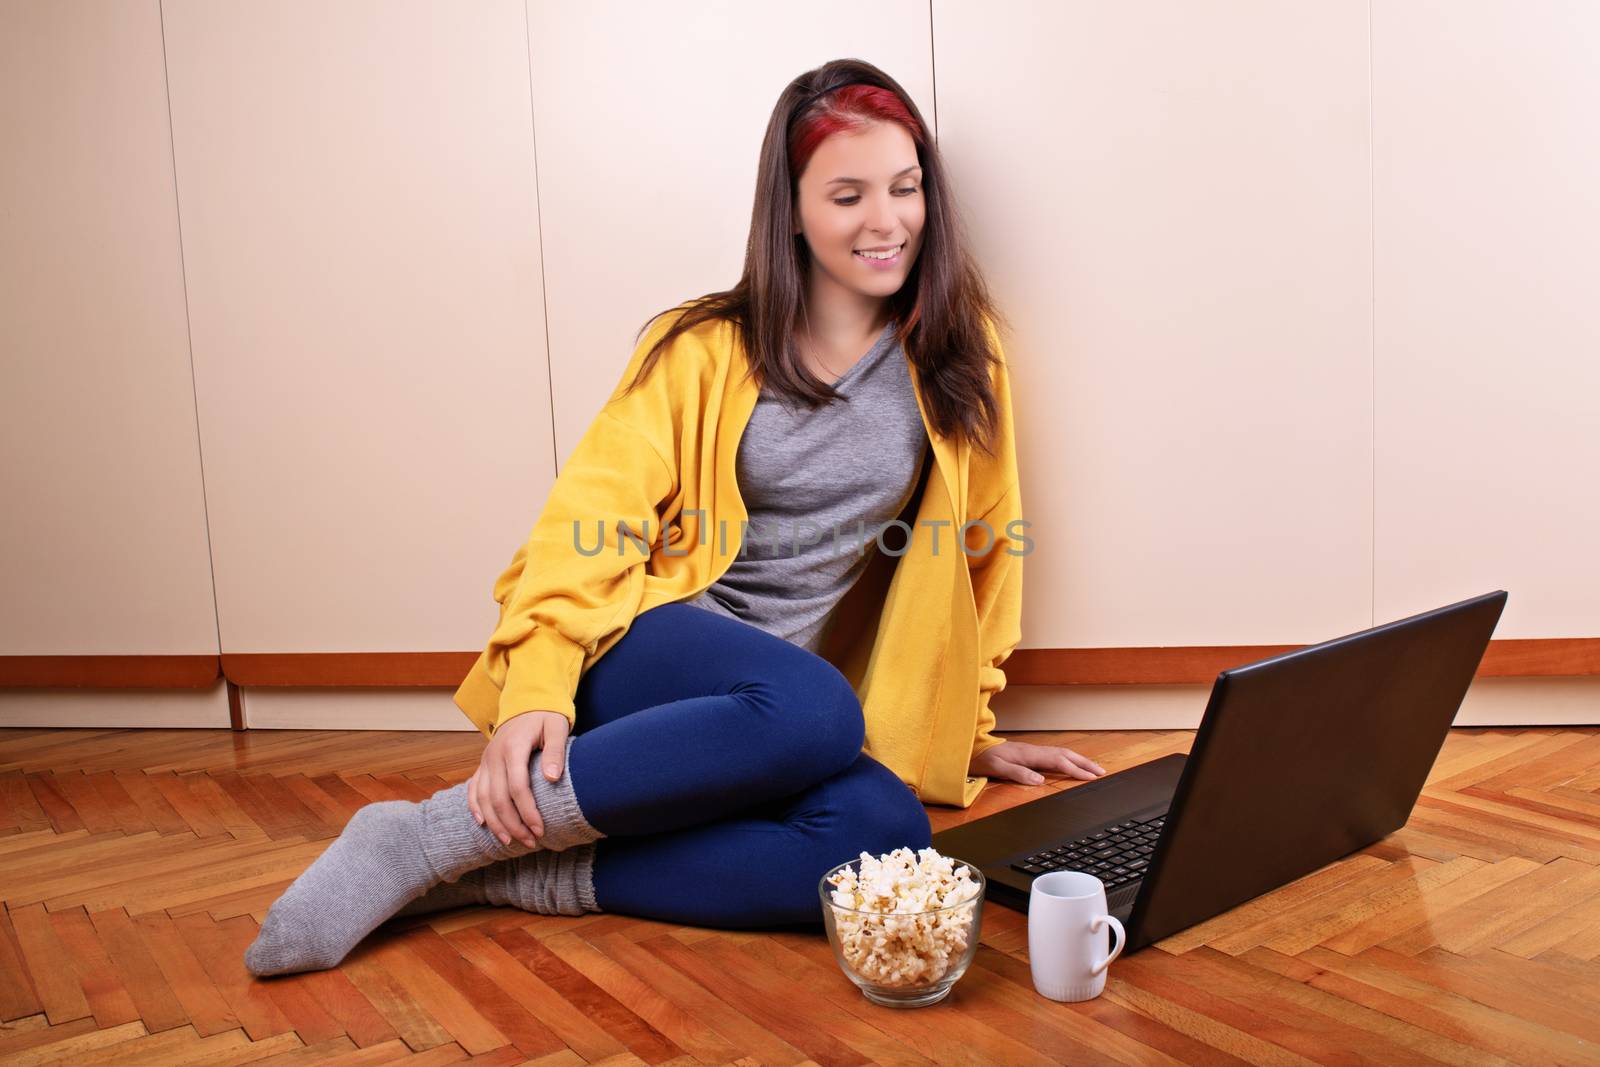 Beautiful smiling young girl in casual clothes sitting on the floor of her bedroom, ready to watch a movie on her laptop with a bowl of popcorn and a cup of coffee or tea. Leisure concept.